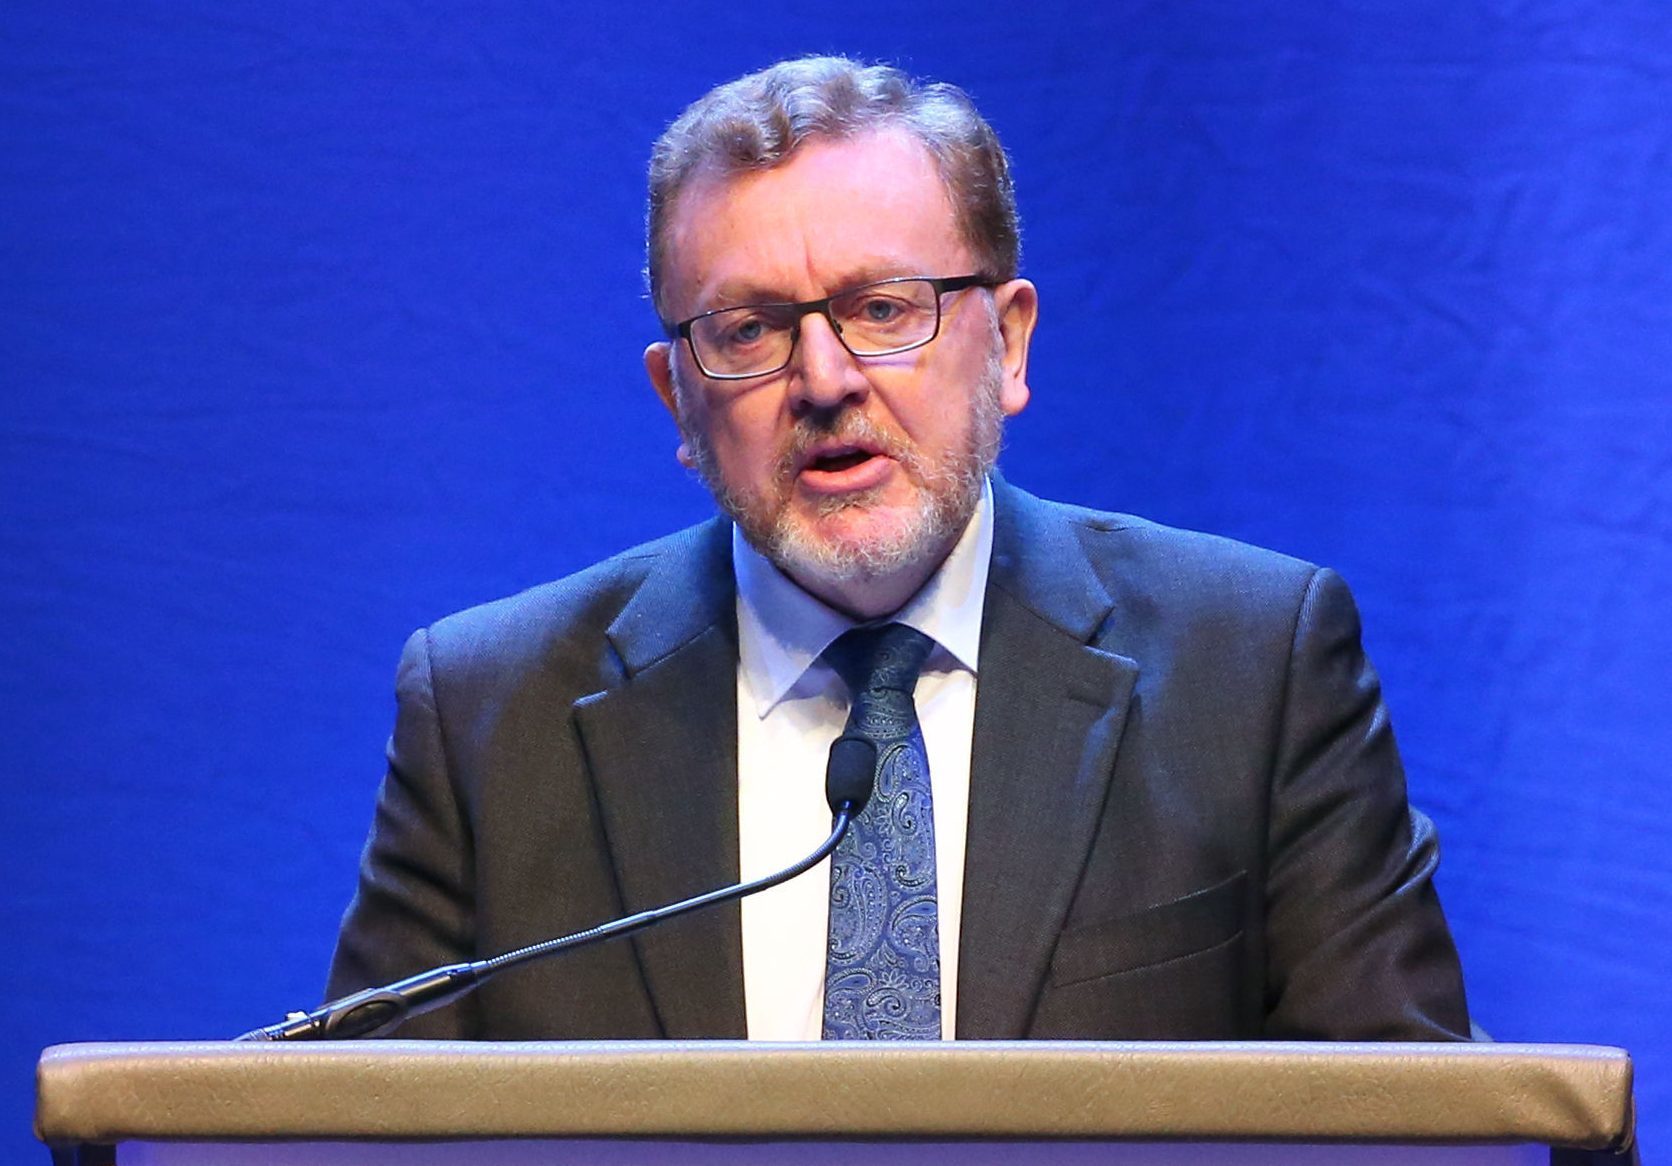 Secretary of State for Scotland David Mundell on stage at the annual Scottish Conservative conference at the Scottish Exhibition and Conference Centre in Glasgow (Jane Barlow/PA Wire)